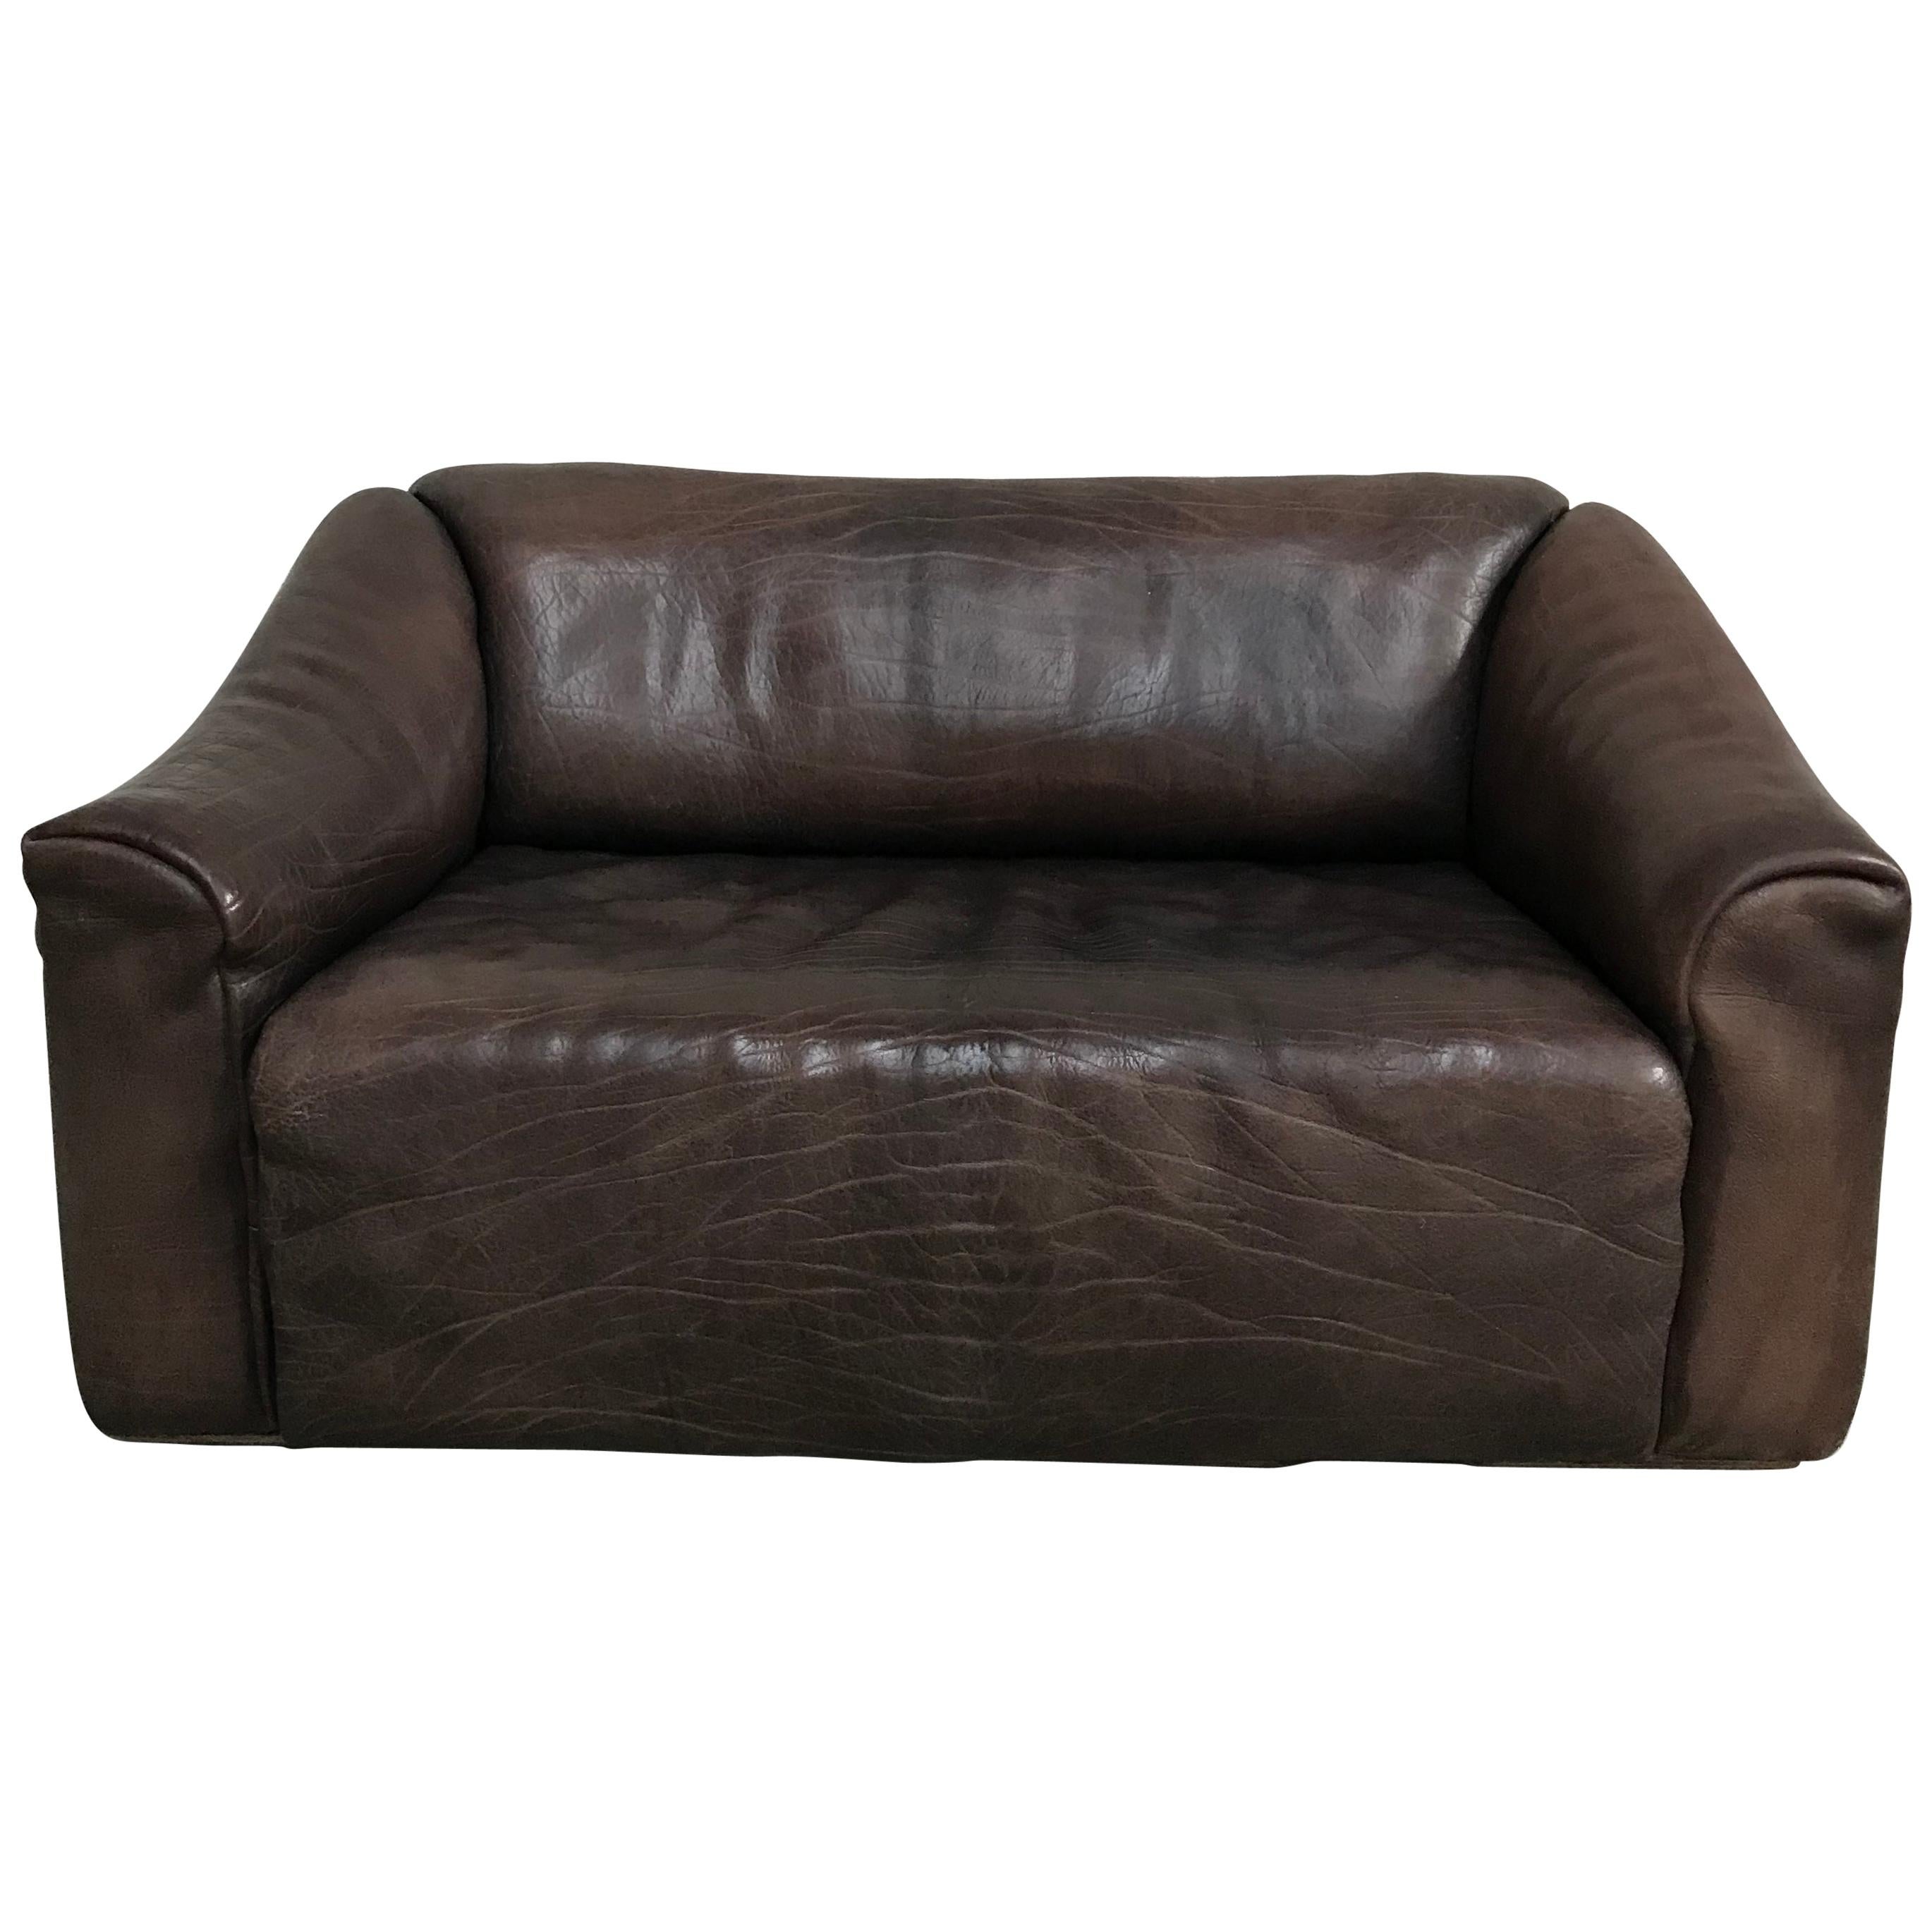 Midcentury Swiss De Sede Ds-47 Two-Seat in Chocolat Neck Leather, 1970s For Sale